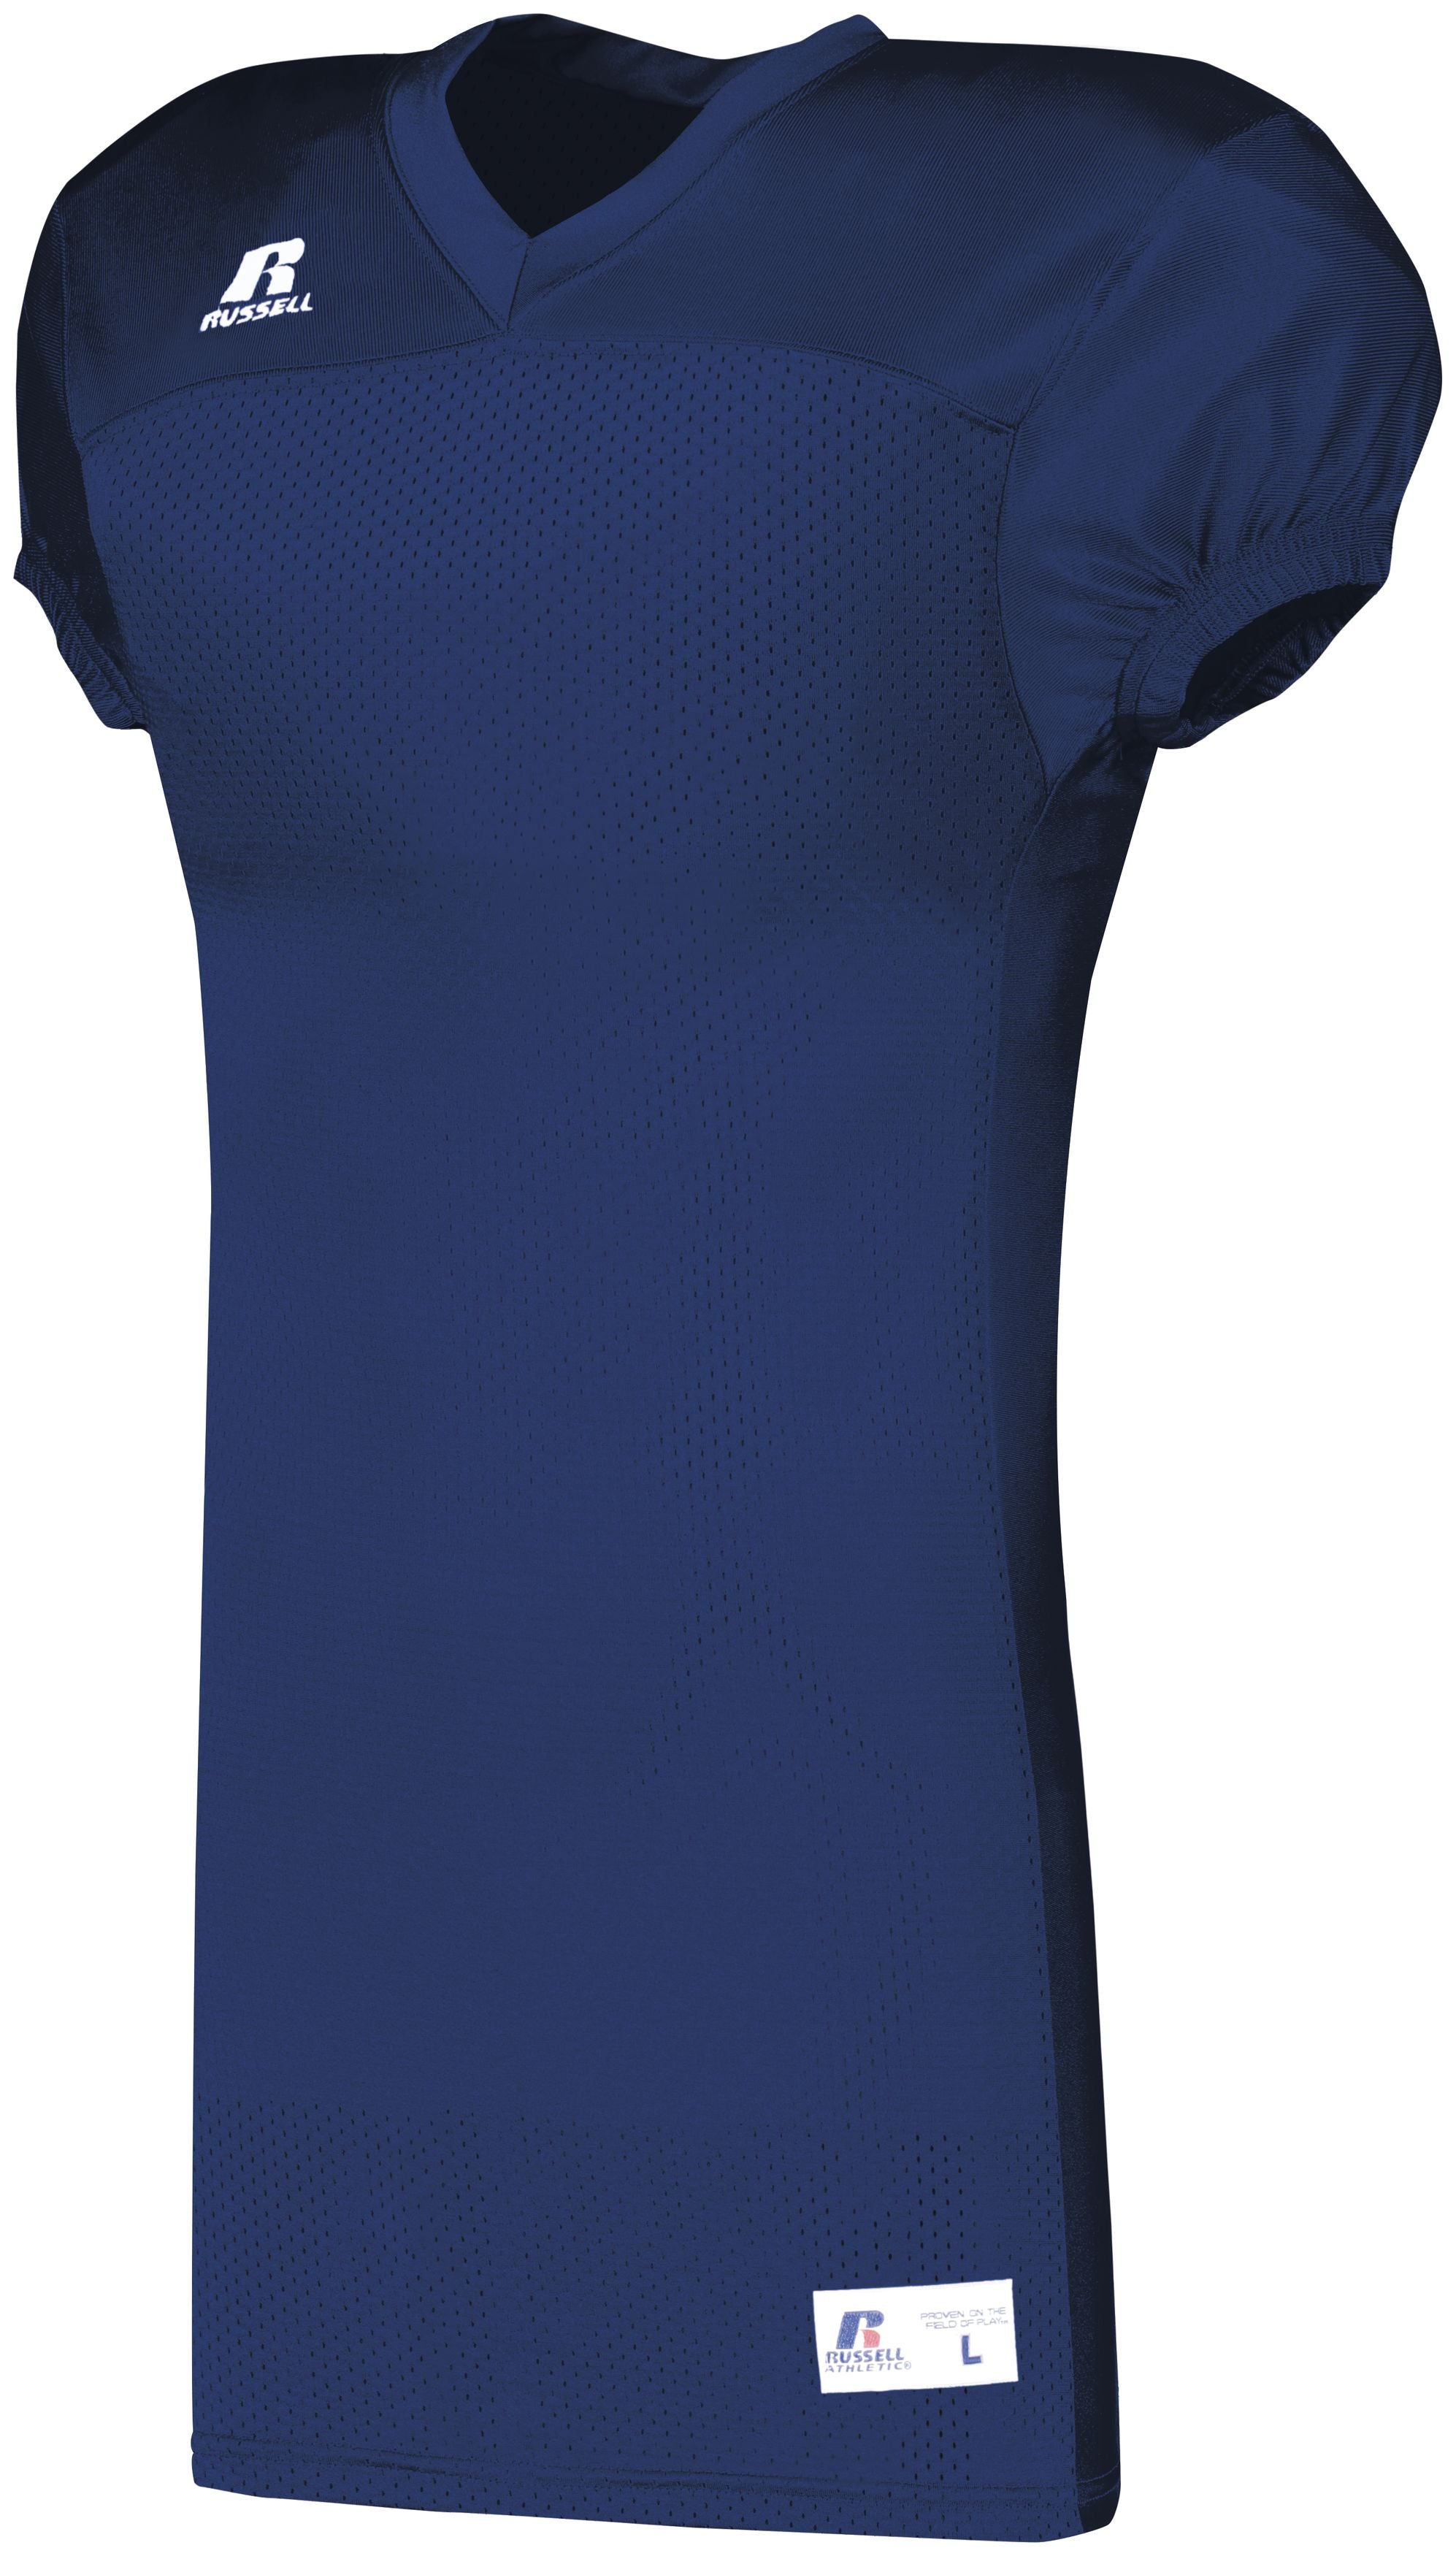 Russell Athletic Youth Solid Jersey With Side Inserts in Navy  -Part of the Youth, Youth-Jersey, Football, Russell-Athletic-Products, Shirts, All-Sports, All-Sports-1 product lines at KanaleyCreations.com